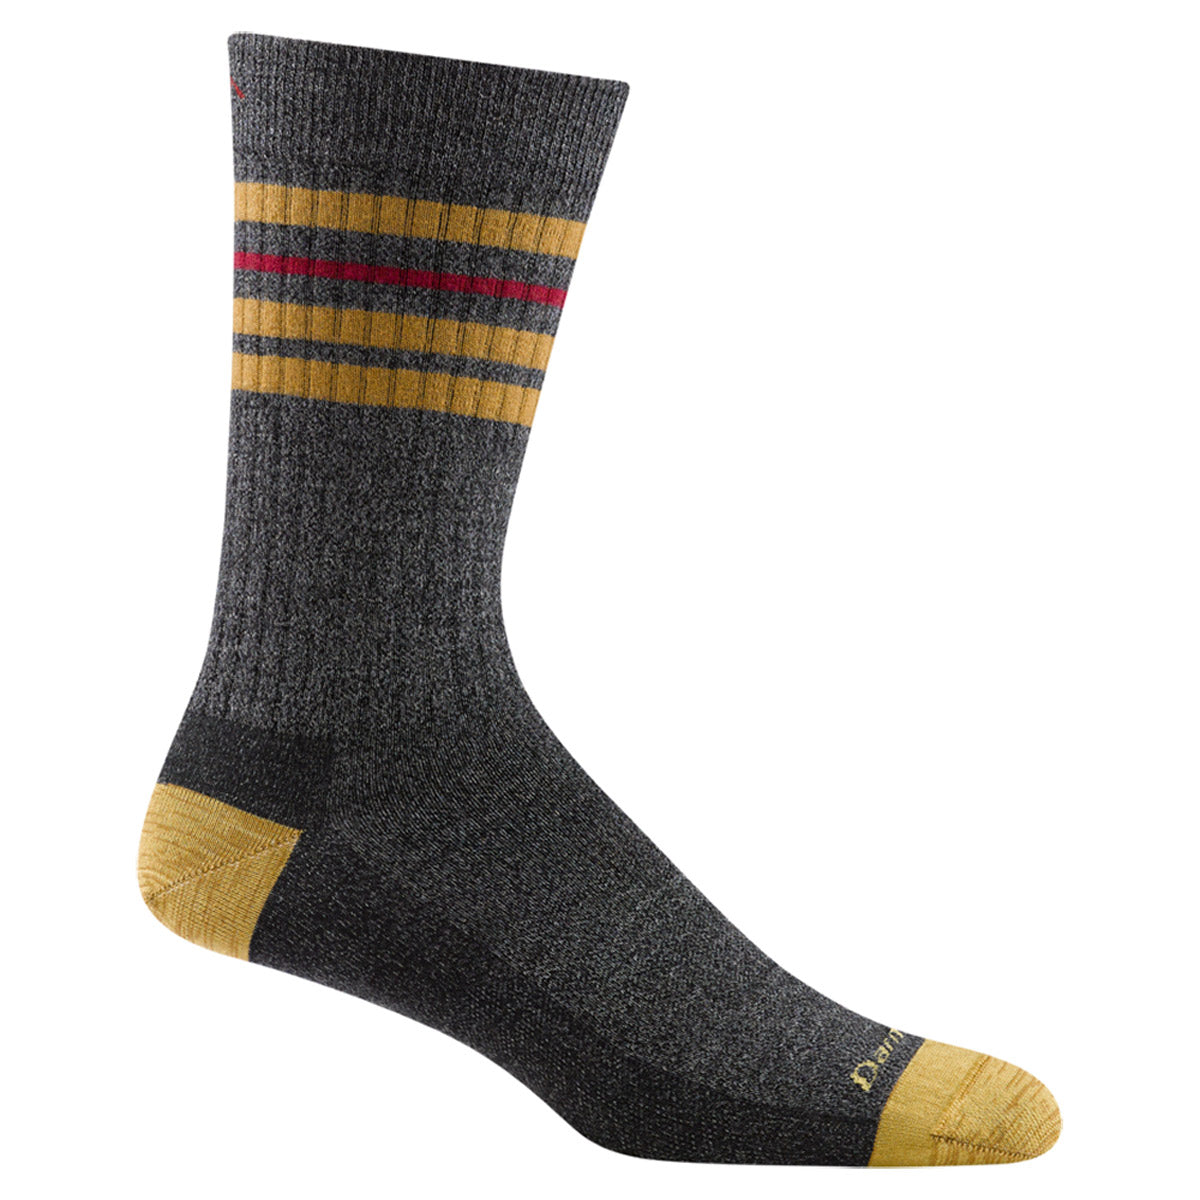 A single Darn Tough Letterman Charcoal Men&#39;s athletic performance sock with yellow toe and heel patches and a pattern of yellow and red stripes near the top, crafted from high-loft ultra-supple twisted yarn.